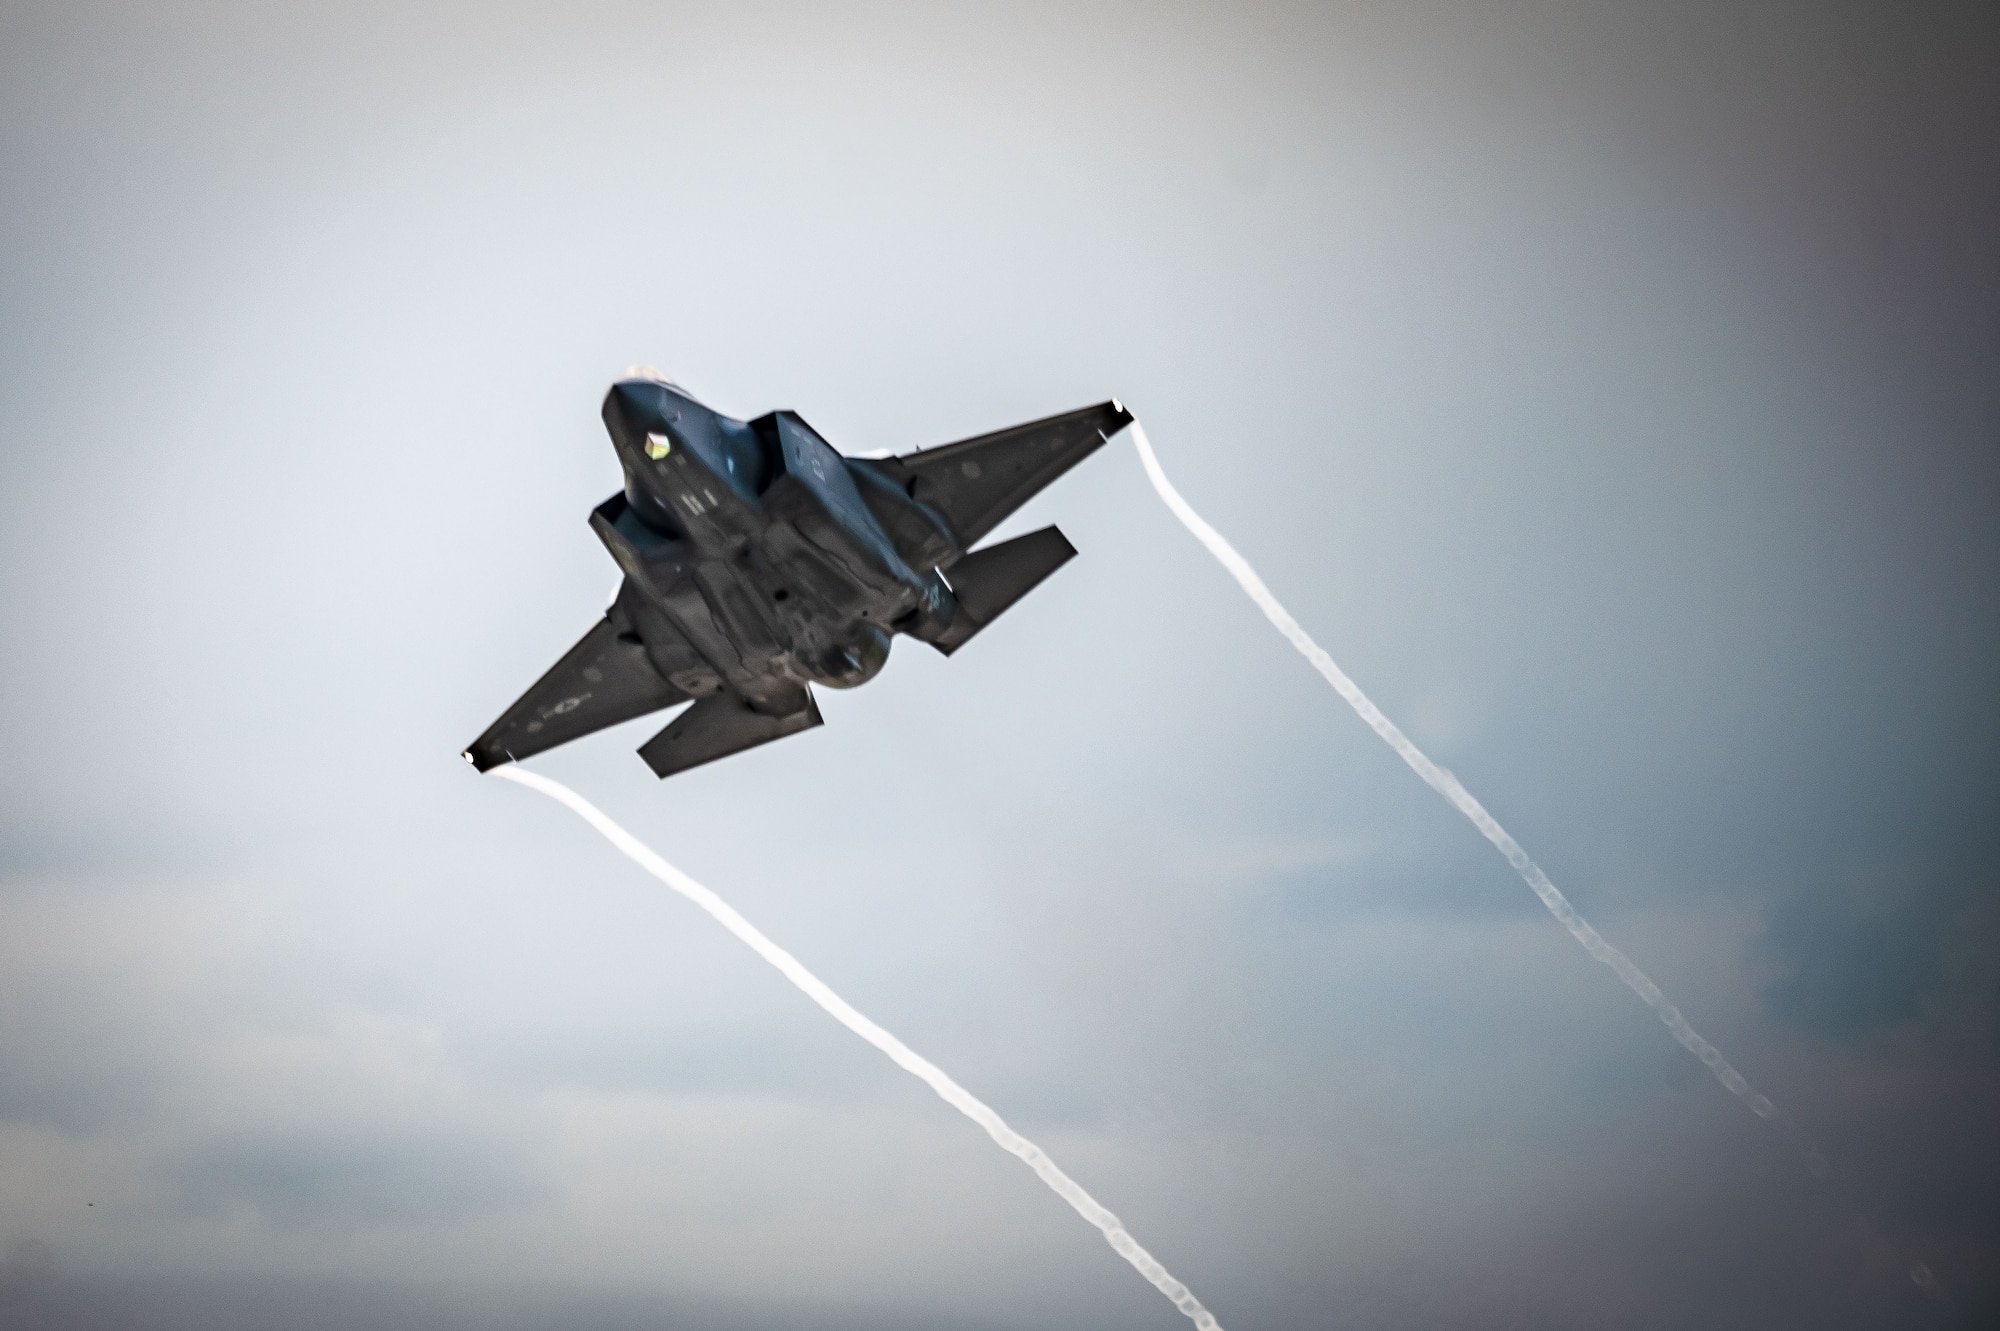 An F-35A Lightning II assigned to the 354th Fighter Wing (FW) takes off during an Agile Combat Employment exercise on Eielson Air Force Base, Alaska, July 13, 2021. The 354th FW conducted a local exercise from a simulated austere location to test its ability to generate airpower quickly, efficiently and repeatedly. (U.S. Air Force photo by Airman 1st Class Jose Miguel T. Tamondong)